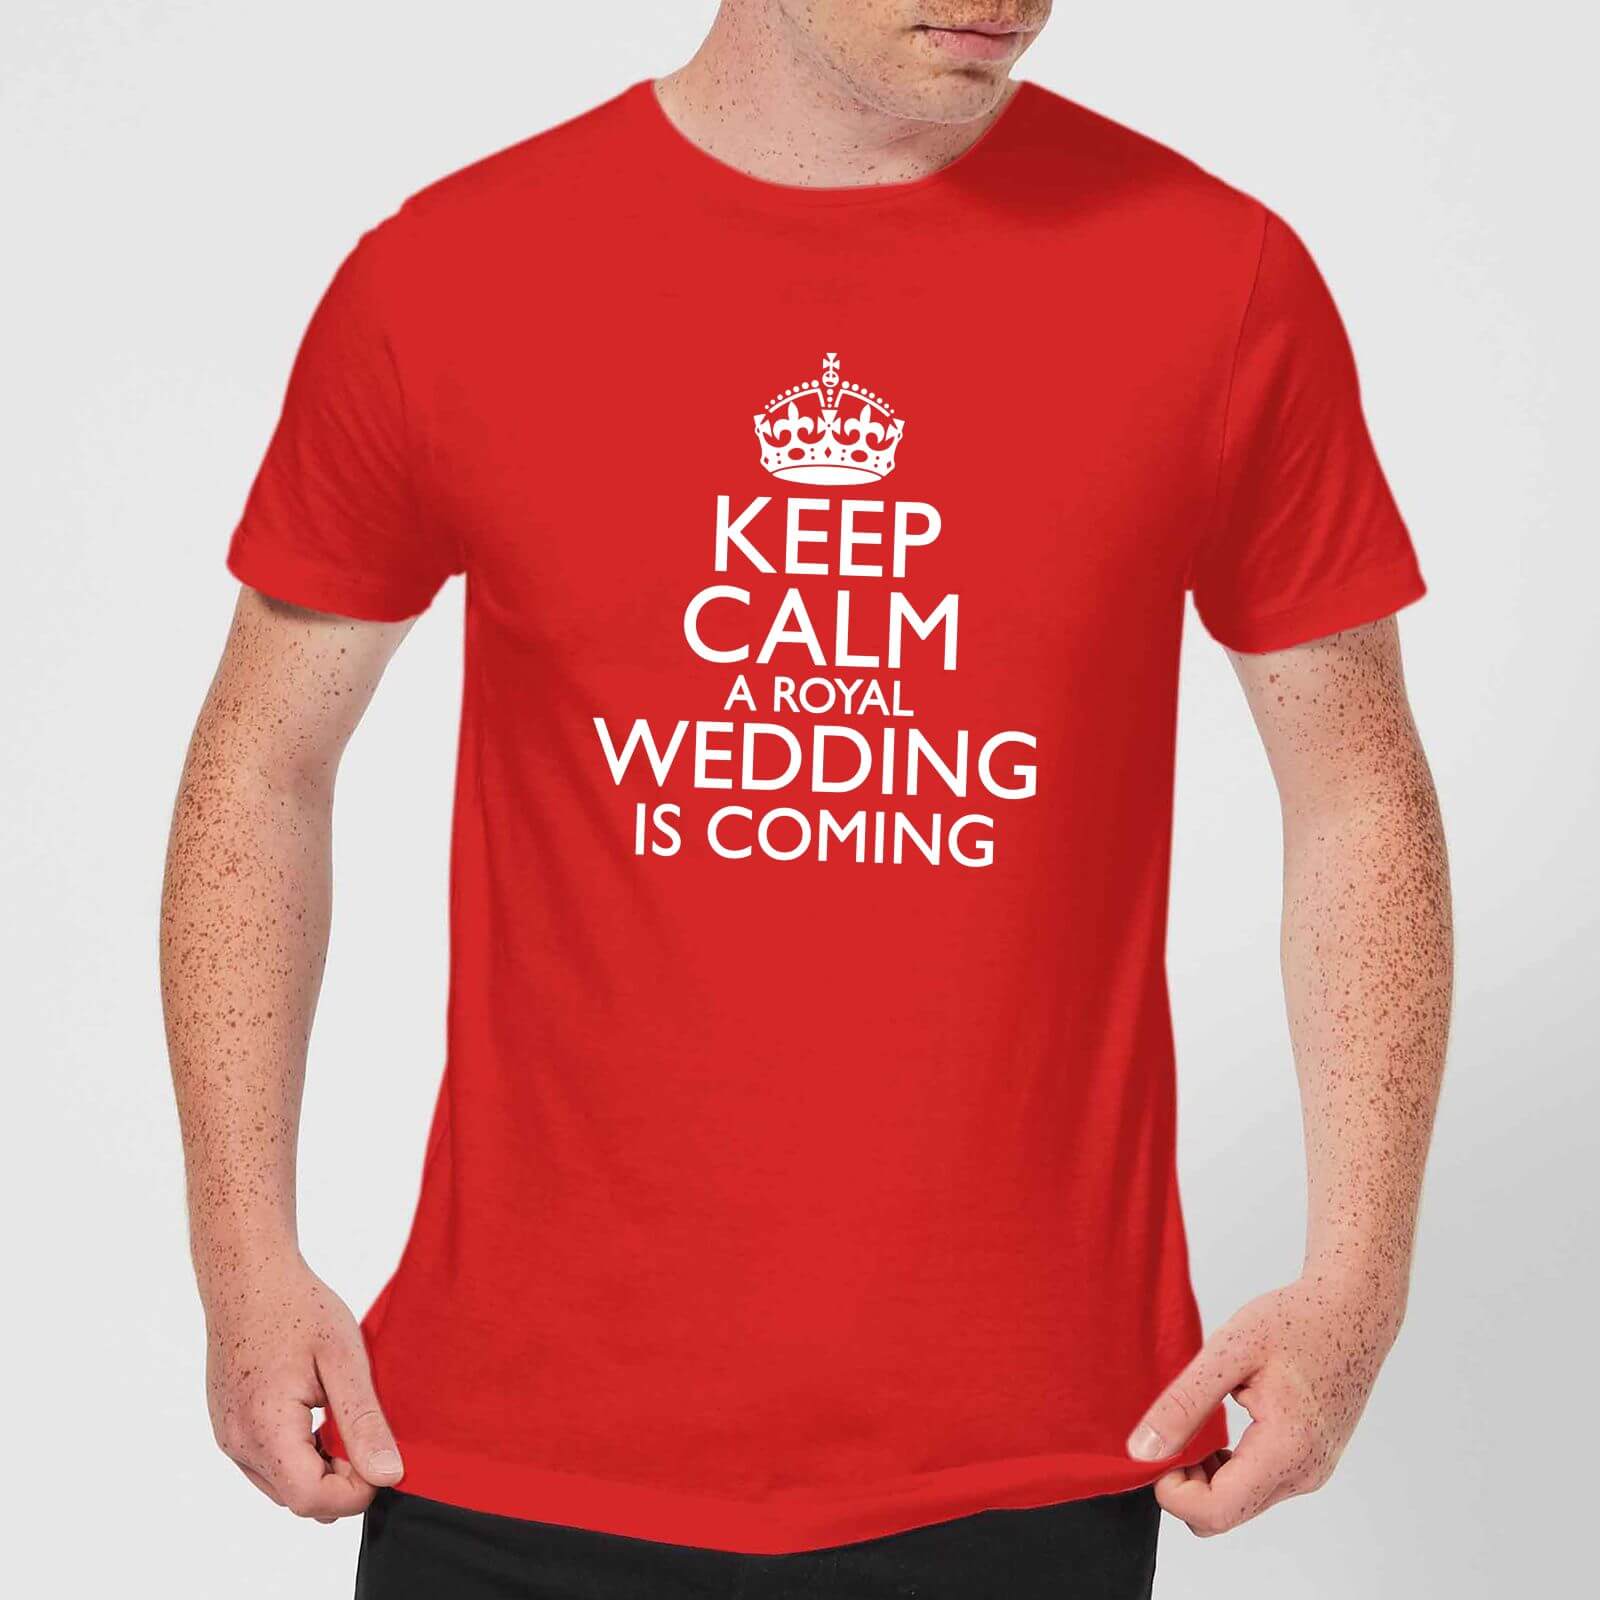 Keep Calm Wedding Coming T-Shirt - Red - L - Red